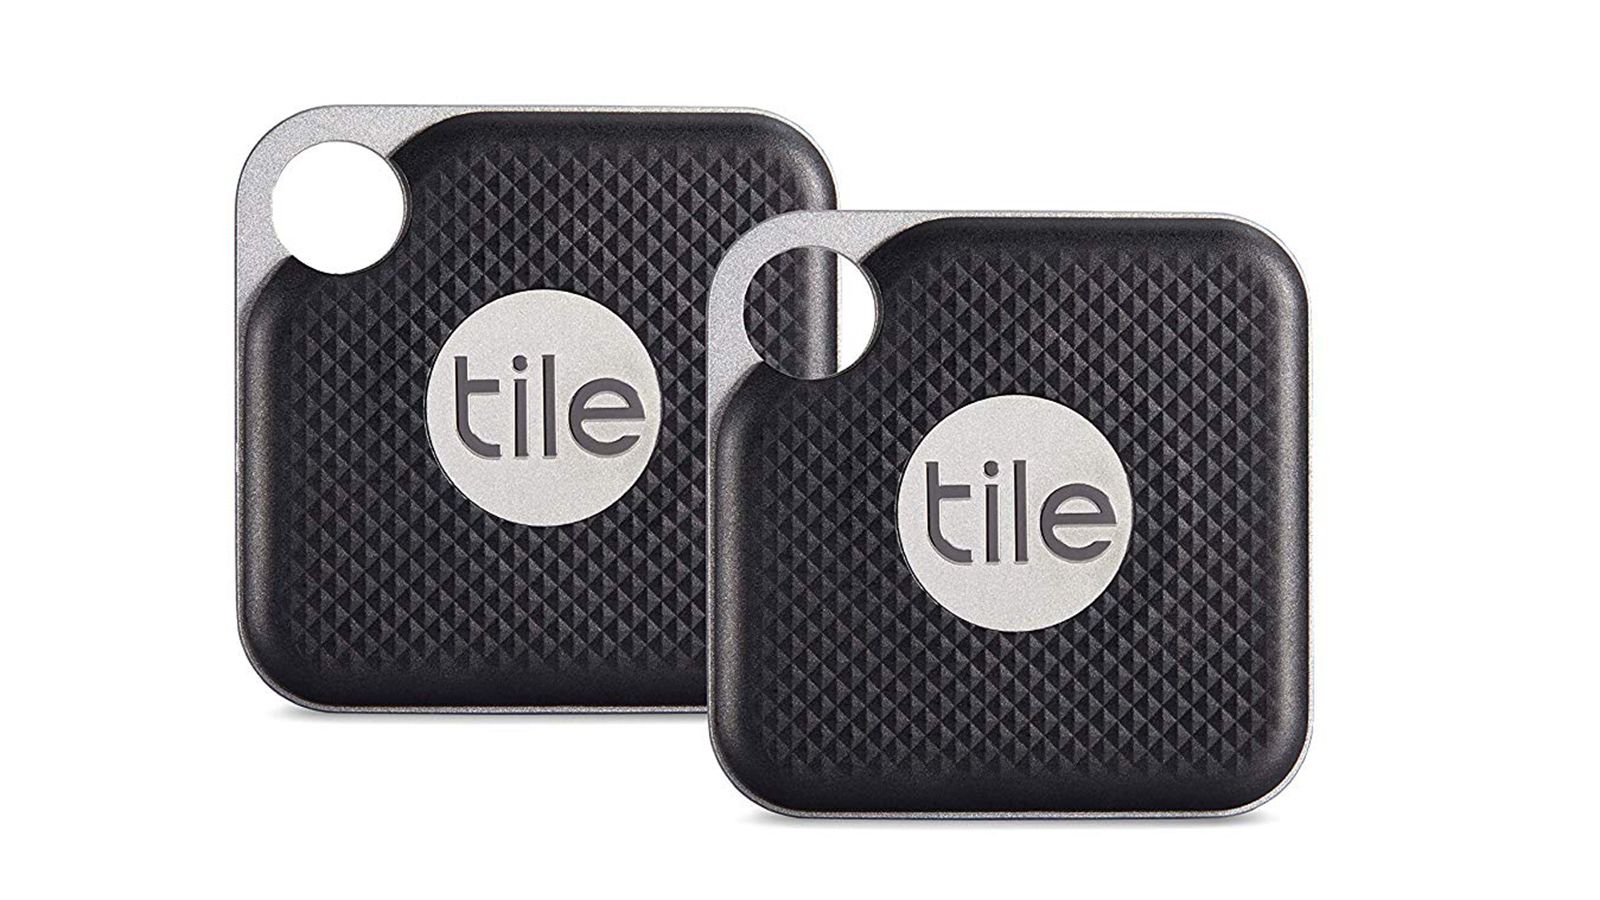 AirTag vs. Tile: Which Bluetooth Tracker Should You Choose?